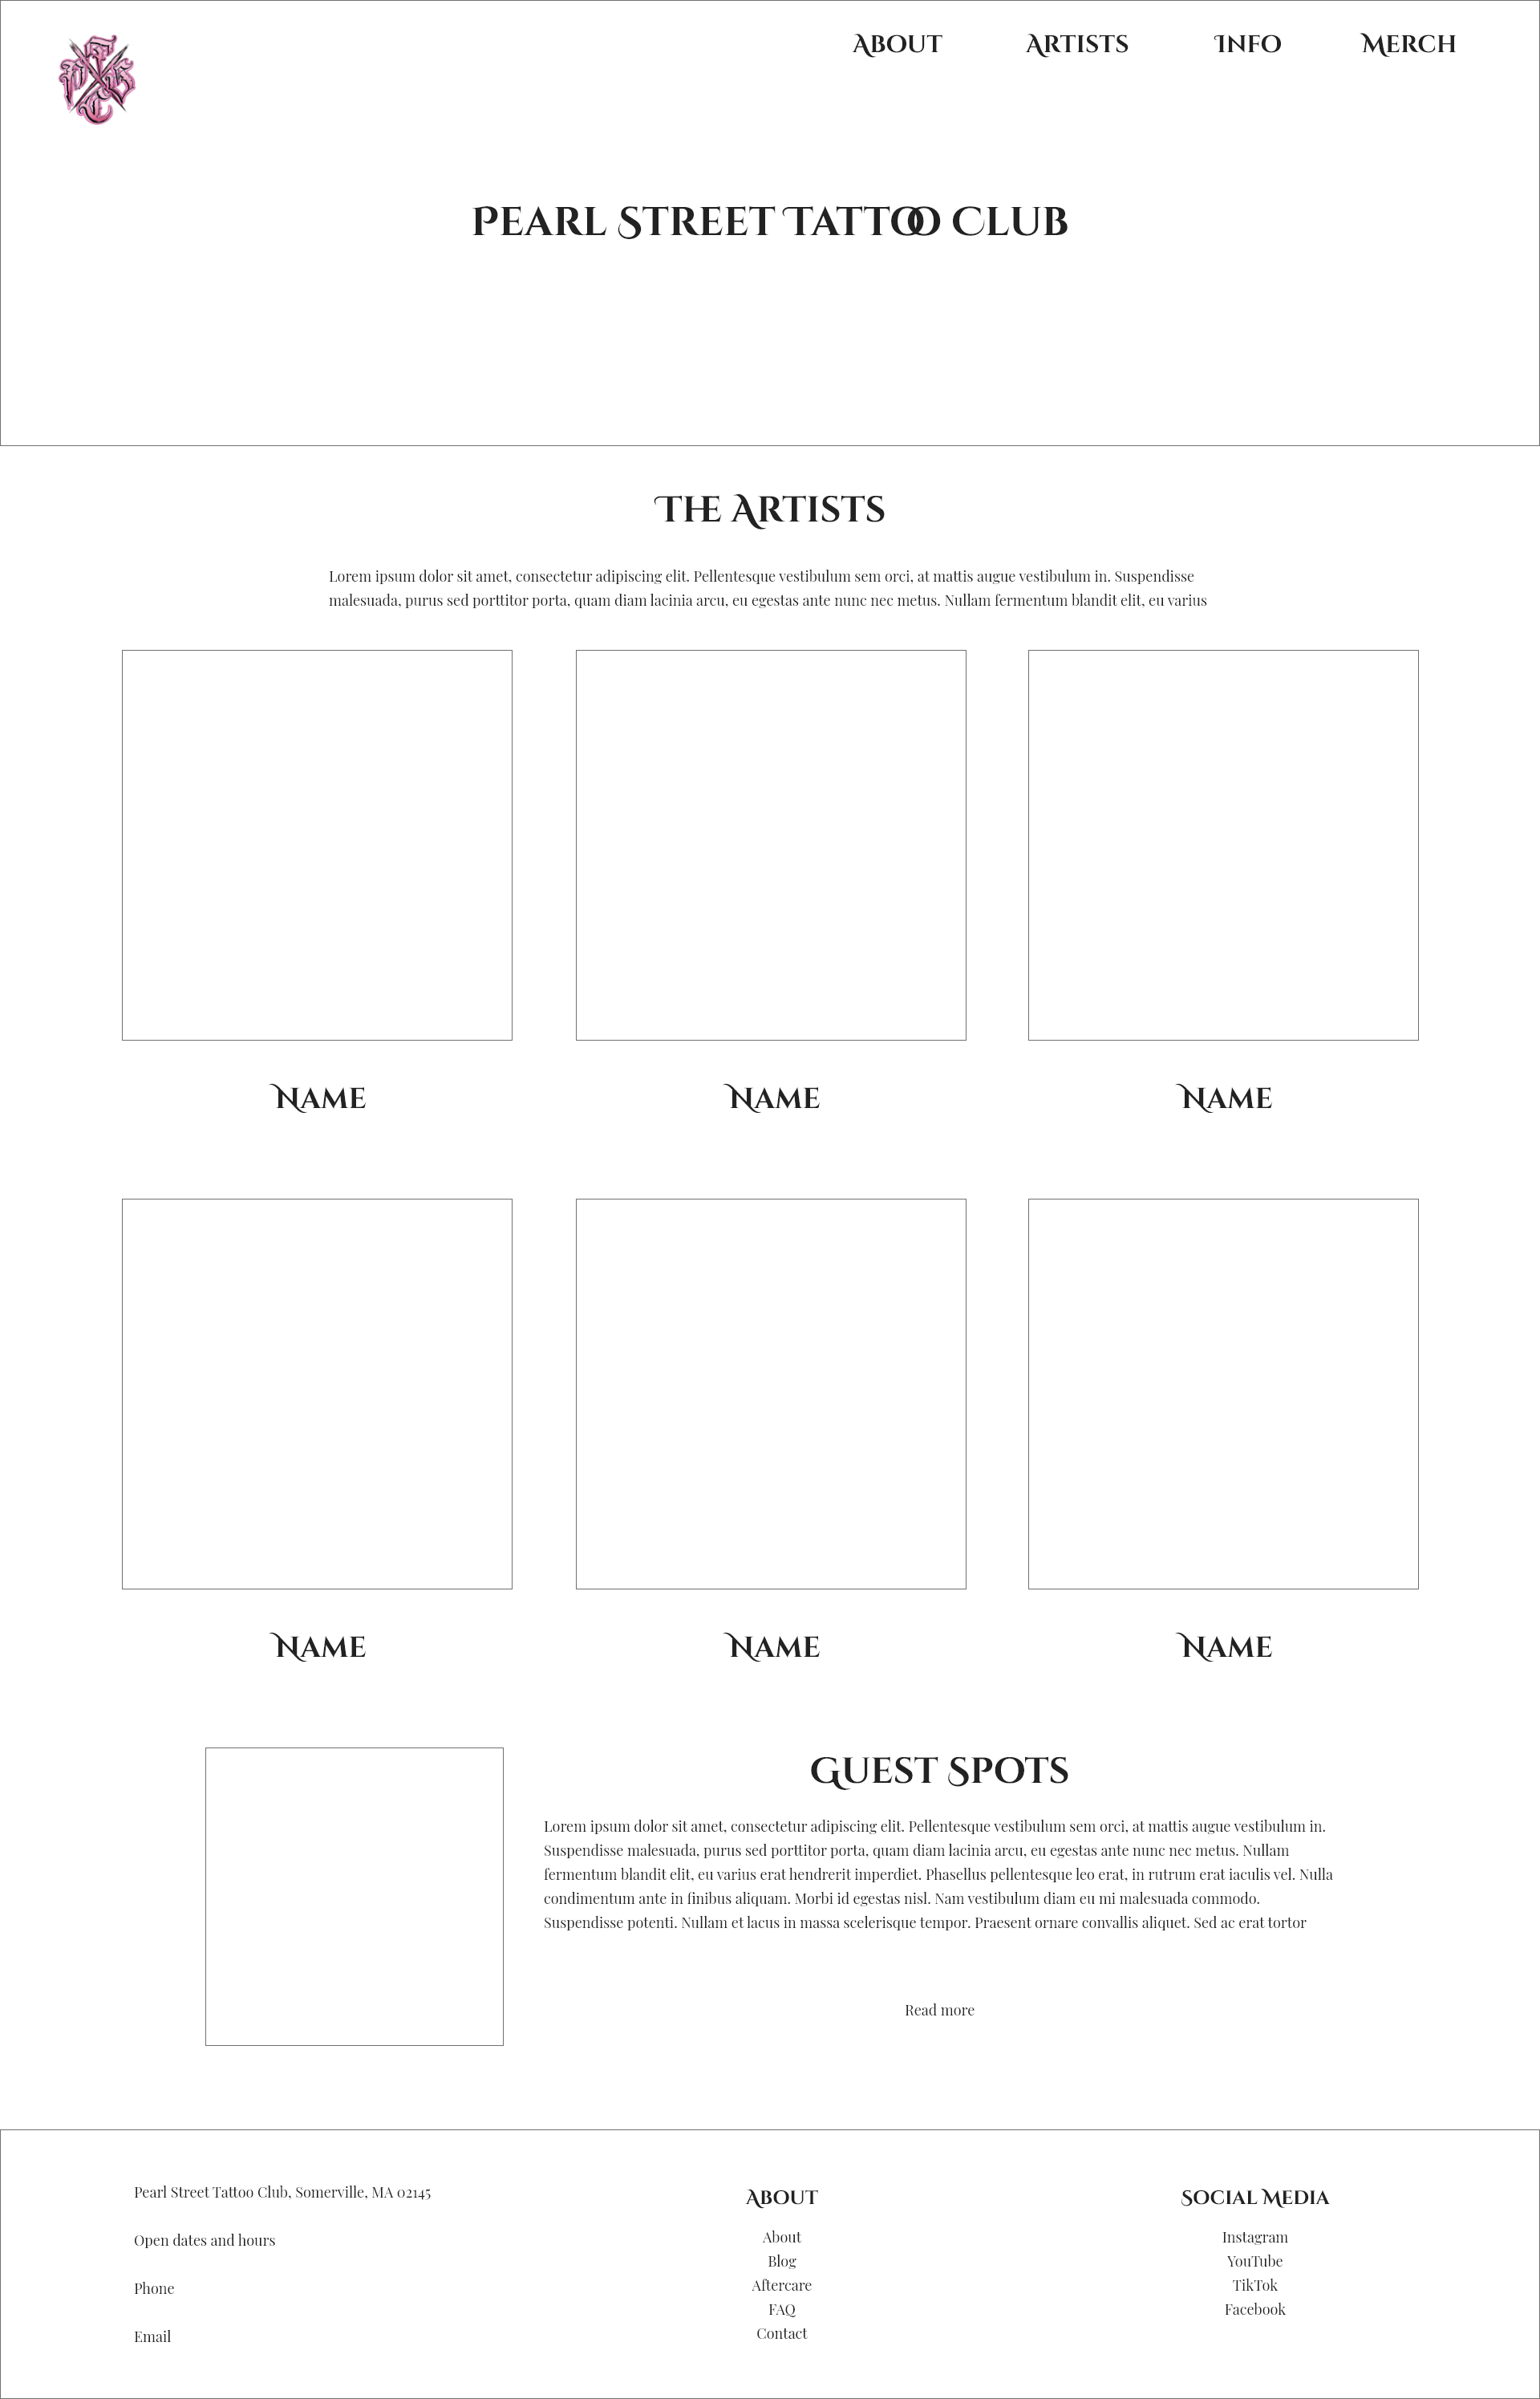 Image of a wireframe of the PSTC Artist wireframe